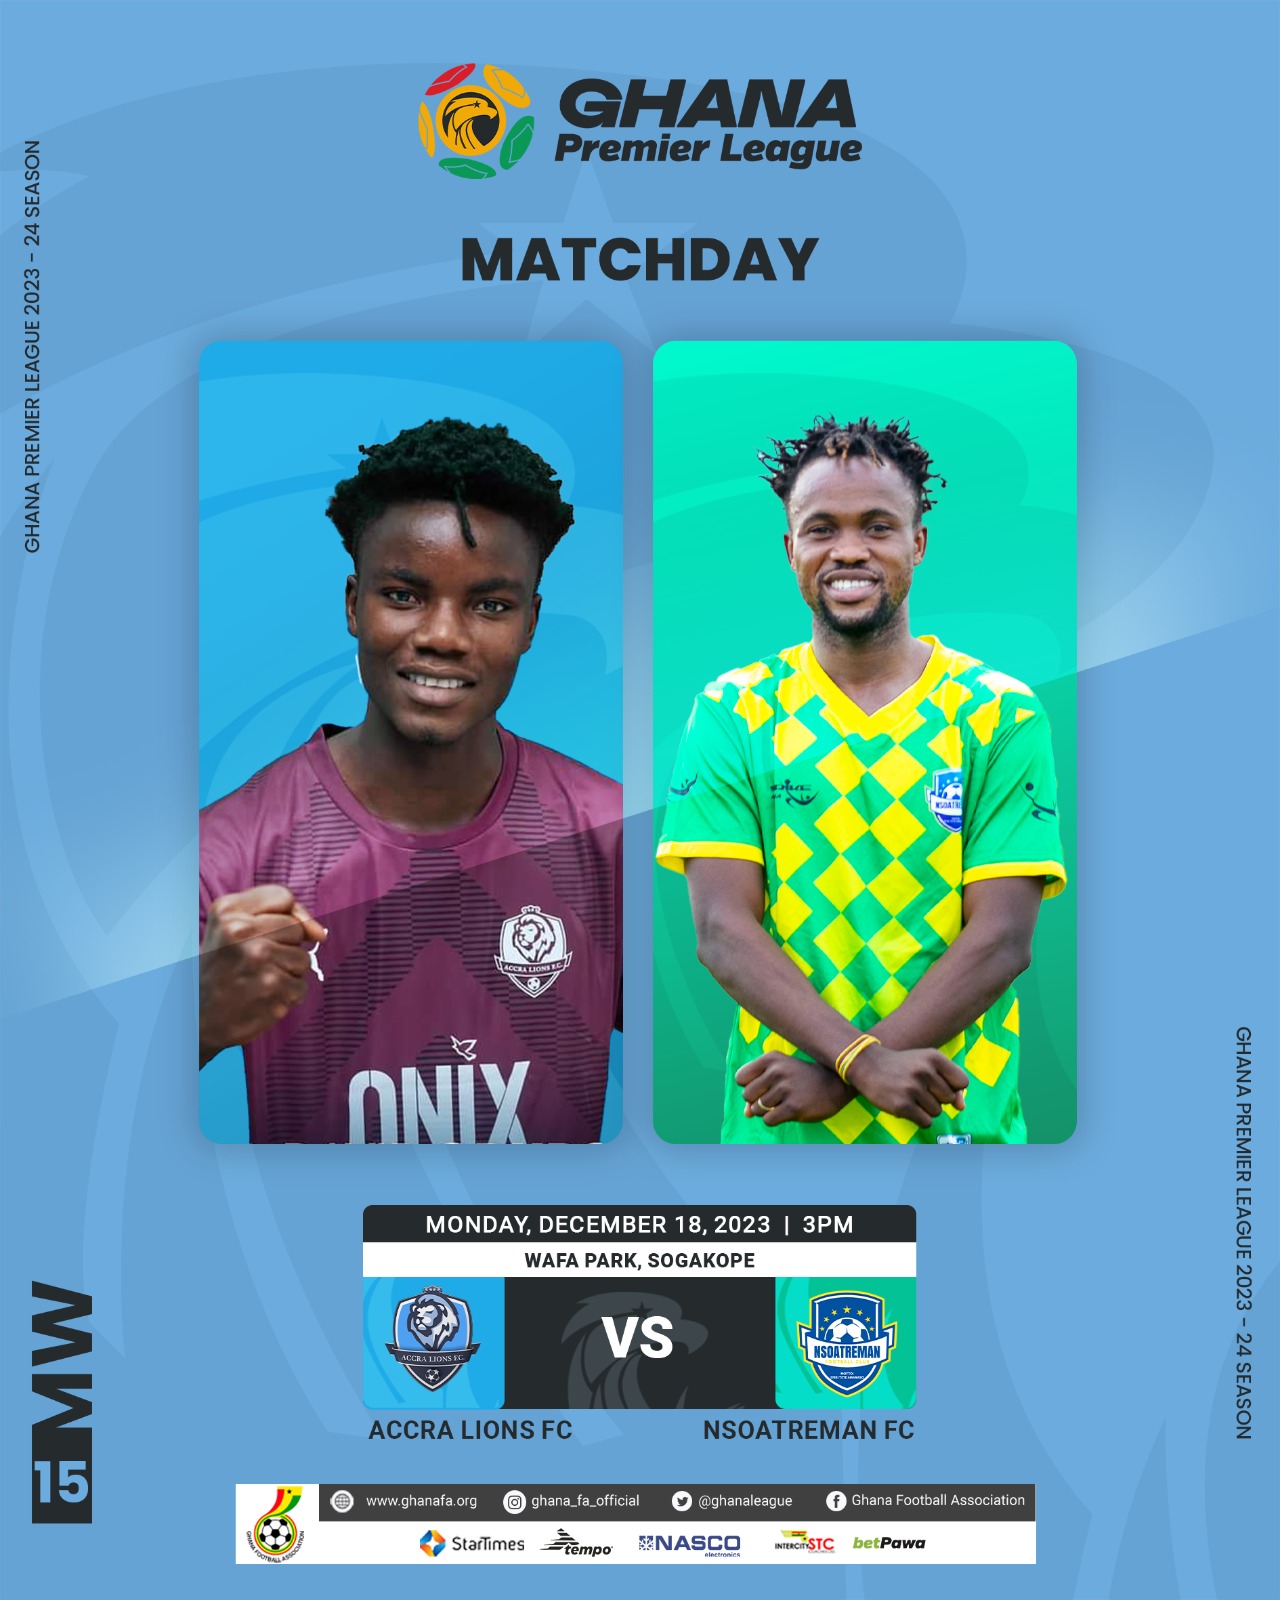 2023/24 GPL: Accra Lions face Nsoatreman FC today